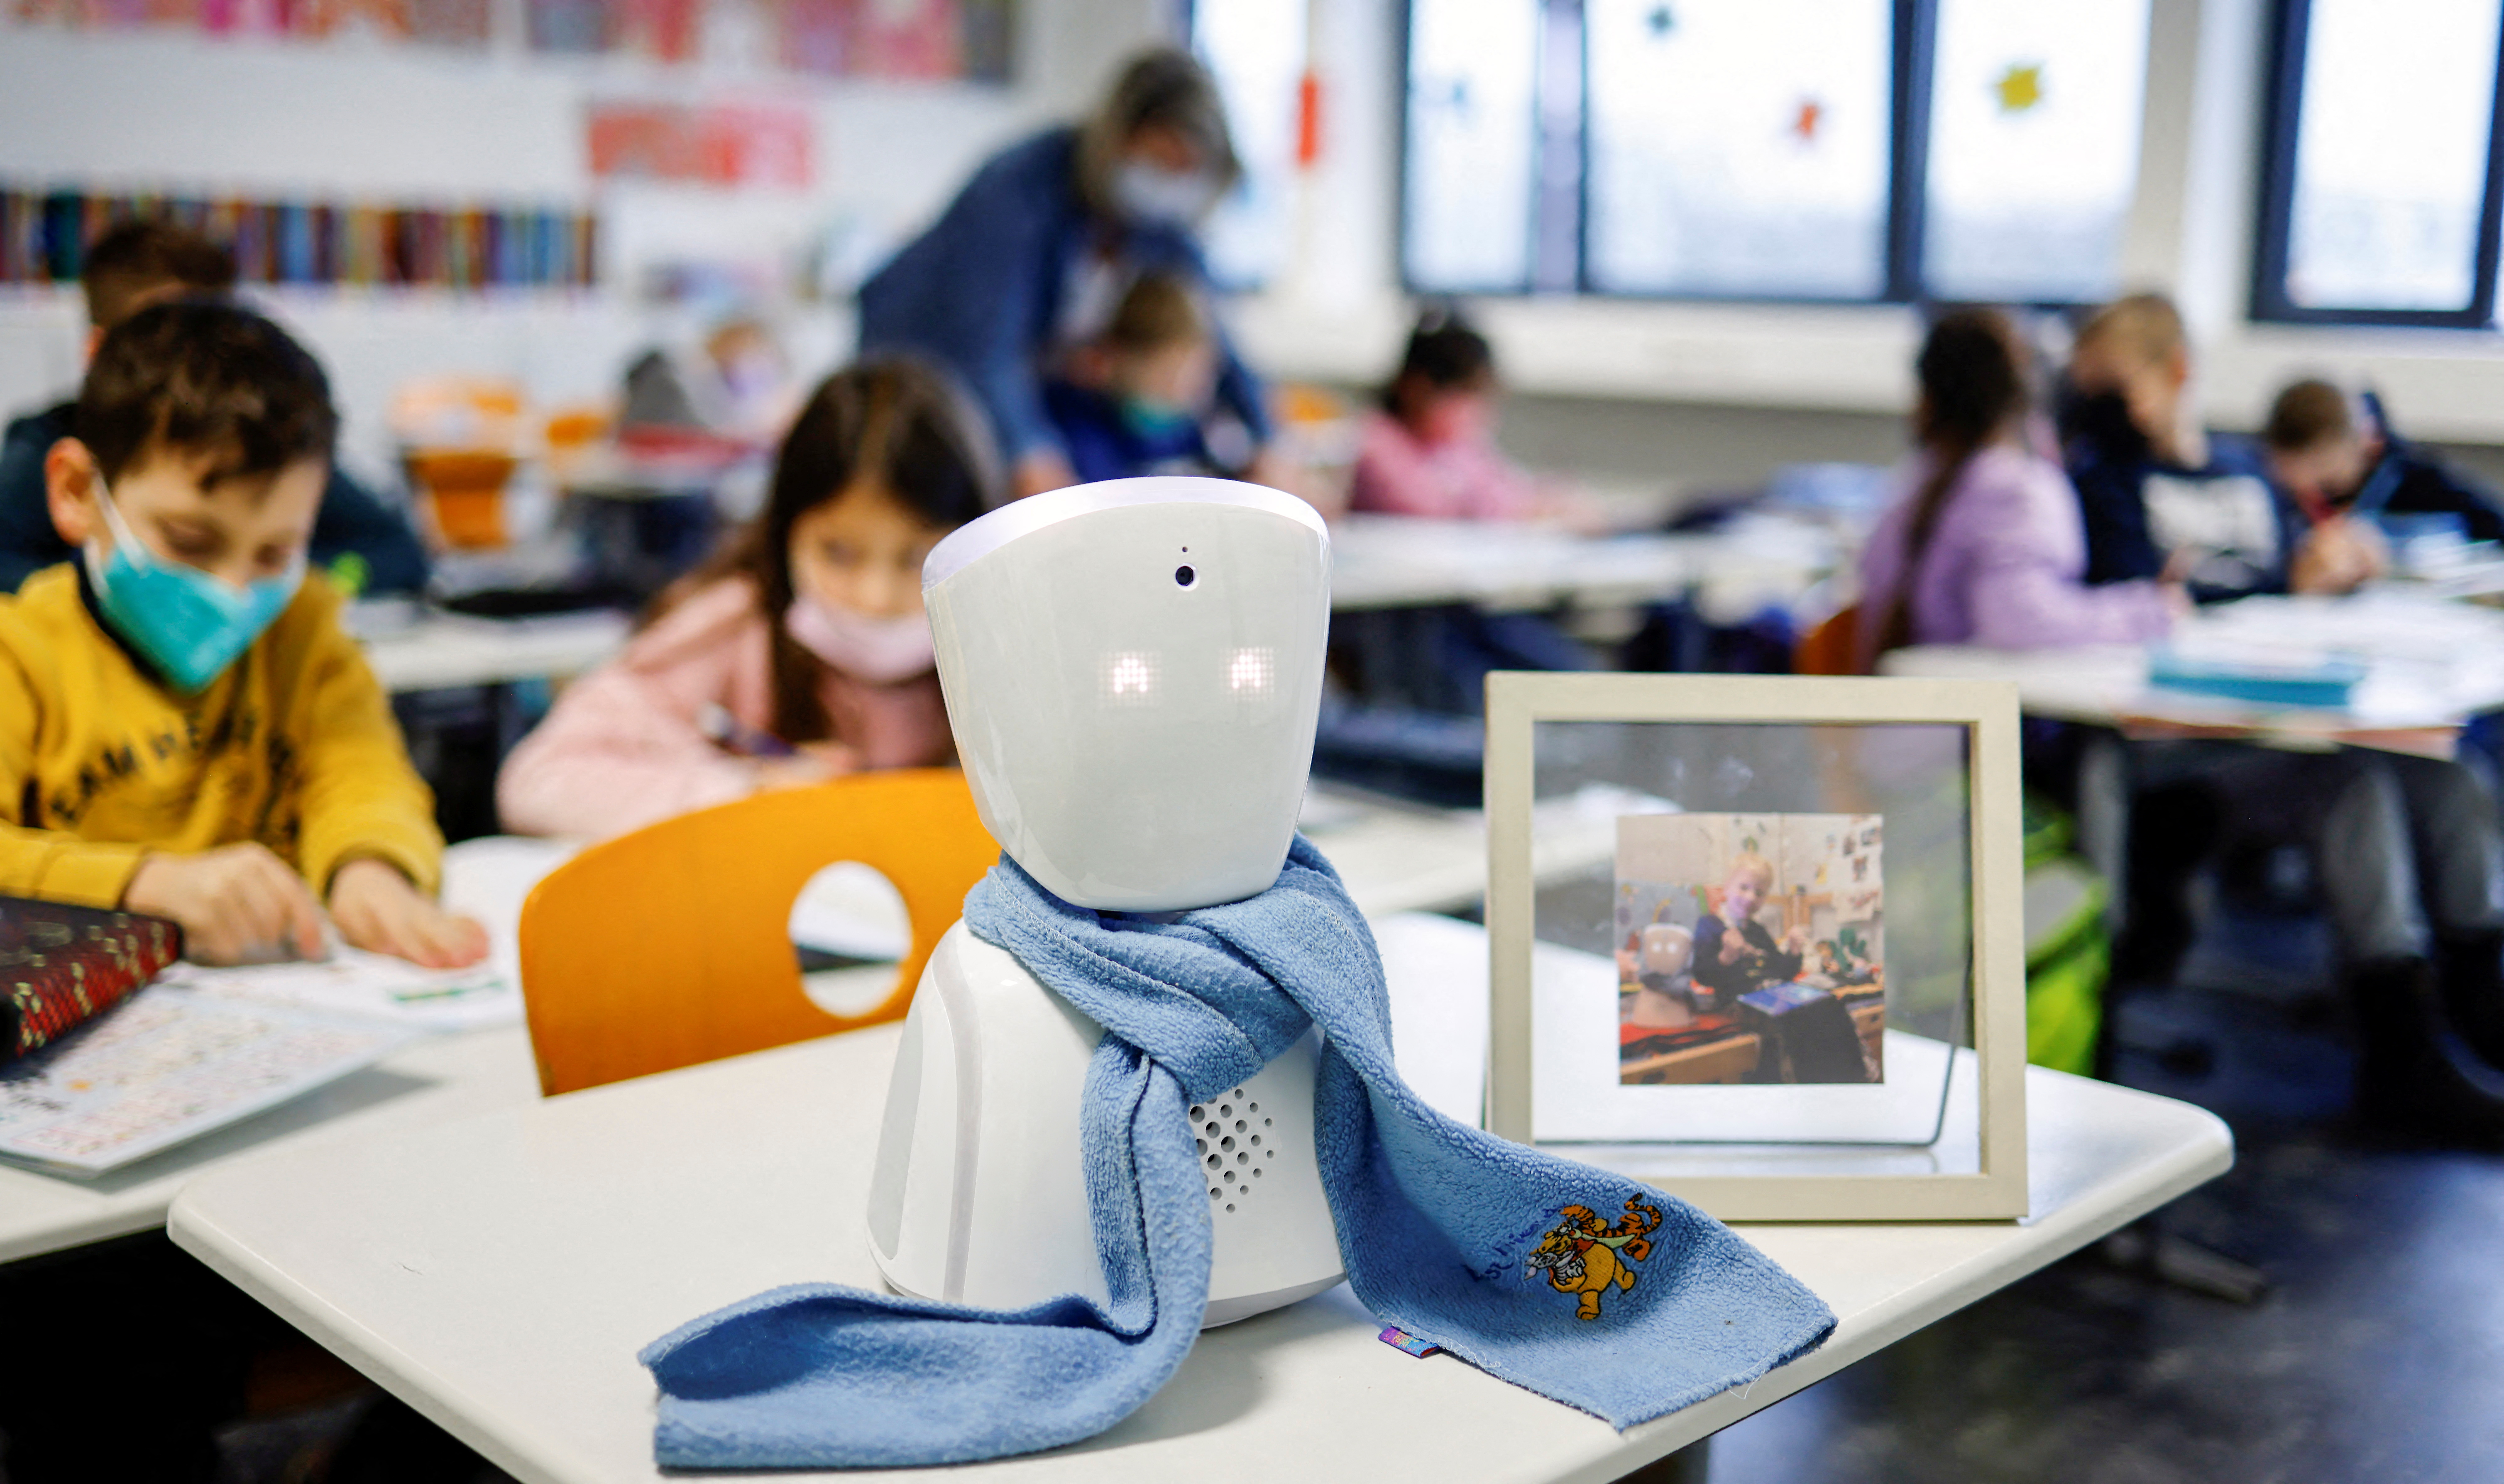 A seven-year-old schoolboy Joshua attends his school lesson via a robot avatar, placed in his classroom, in Berlin, Germany January 13, 2022. REUTERS/Hannibal Hanschke